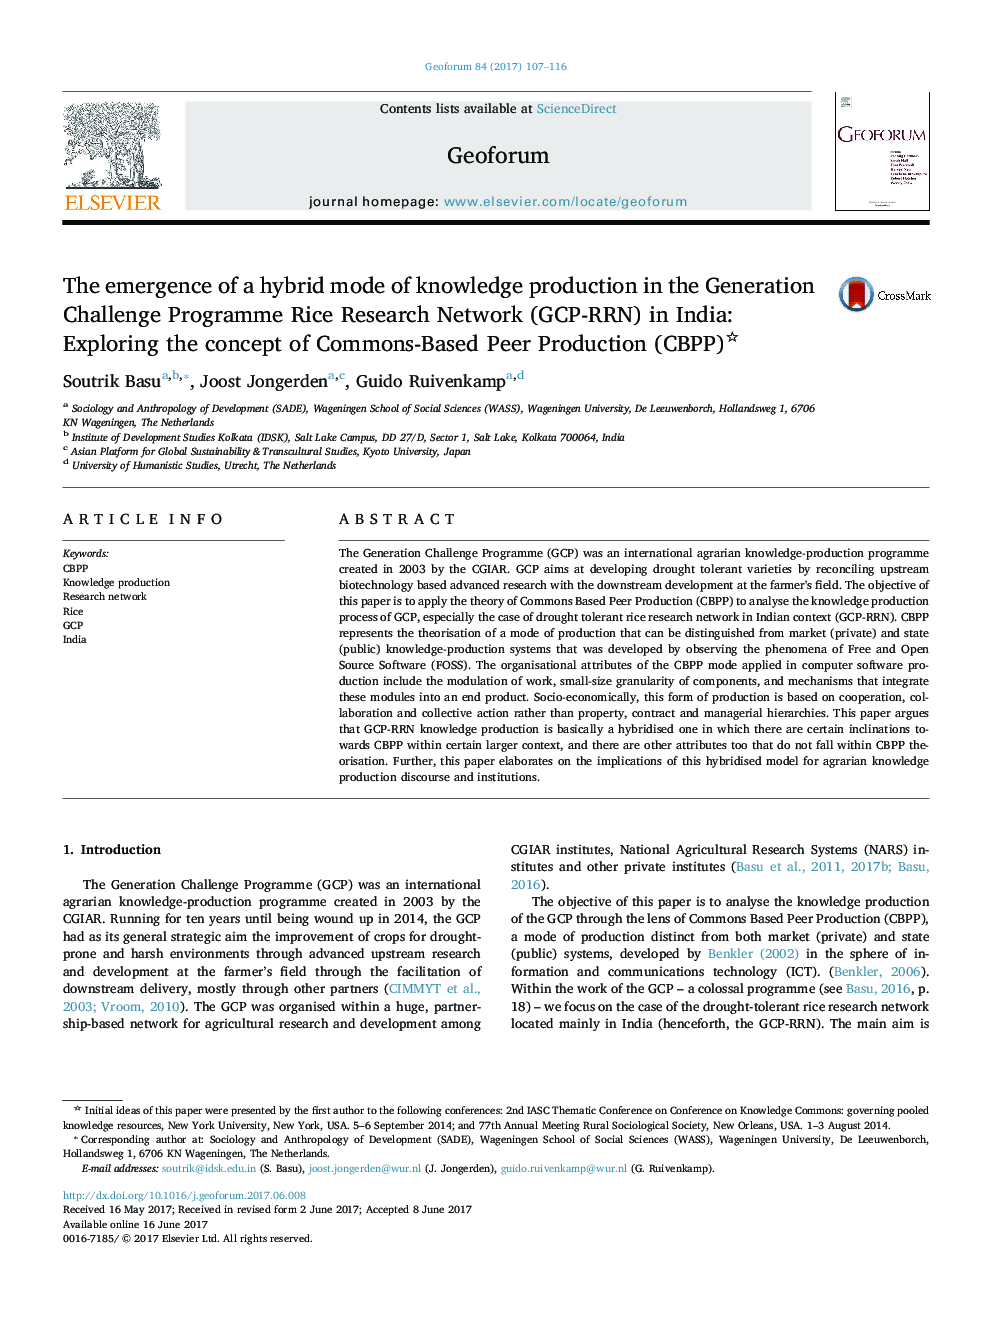 The emergence of a hybrid mode of knowledge production in the Generation Challenge Programme Rice Research Network (GCP-RRN) in India: Exploring the concept of Commons-Based Peer Production (CBPP)